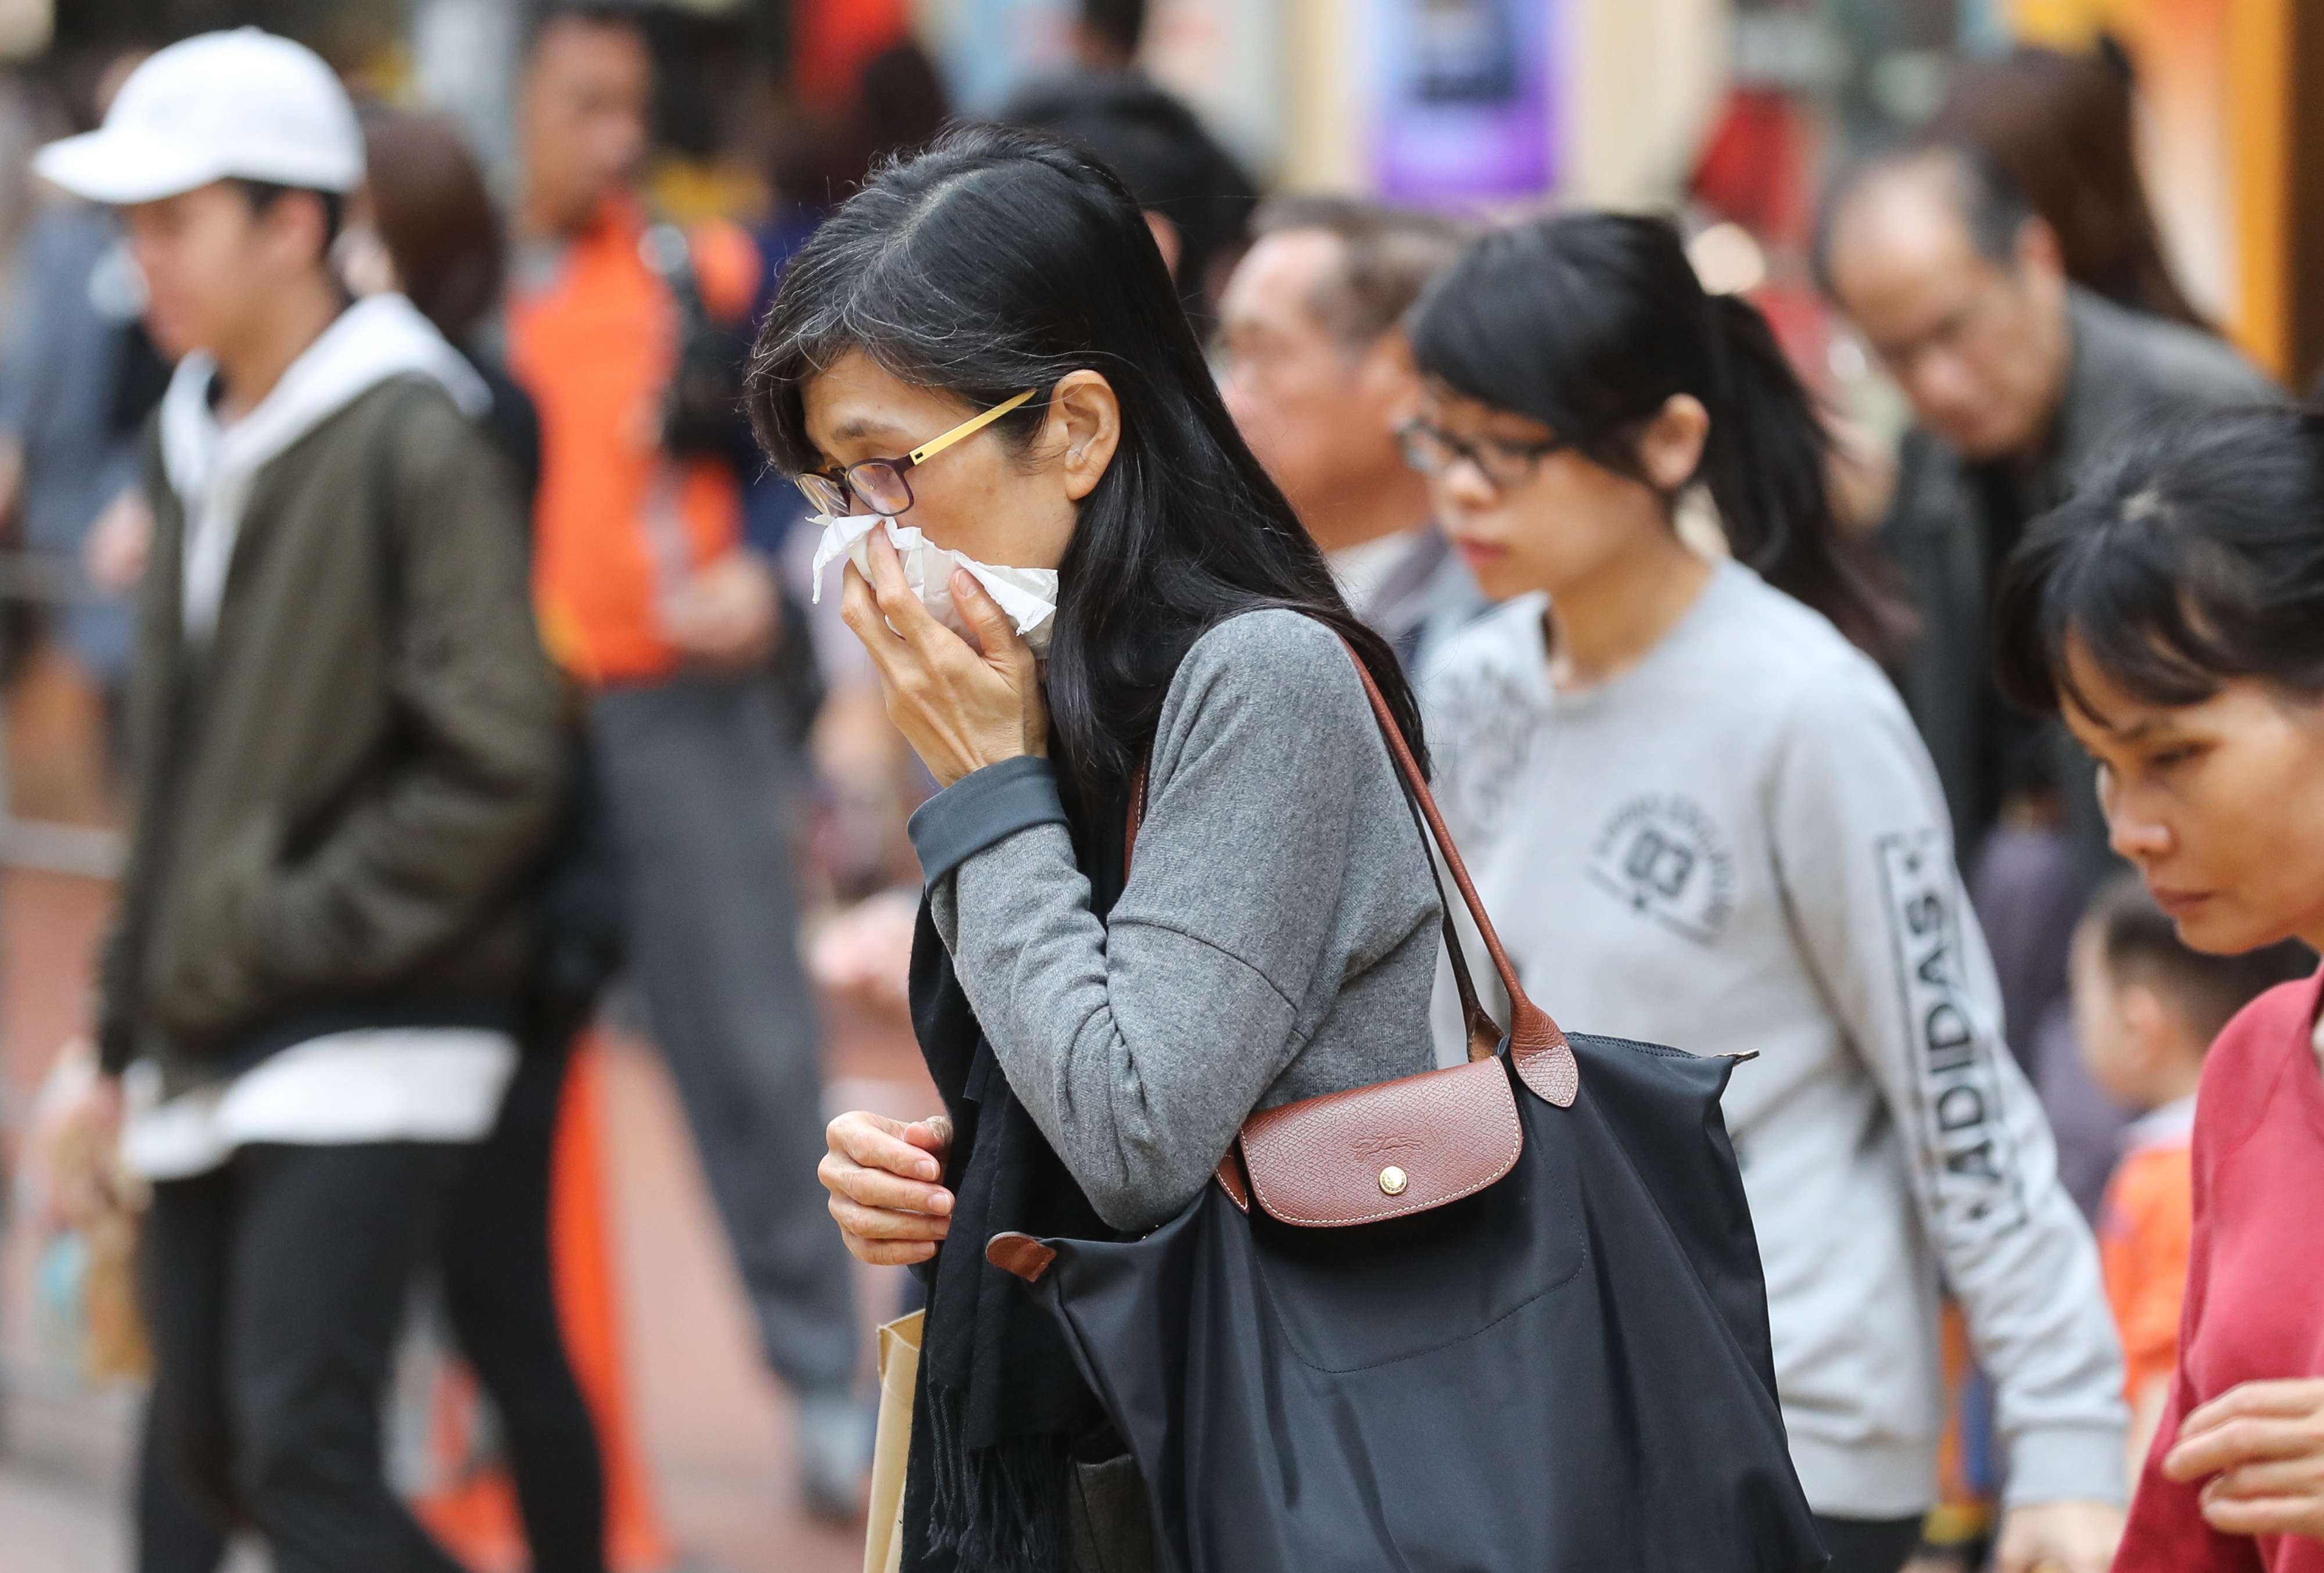 People wear masks on the streets in Causeway Bay as winter sets in. Photo: Edward Wong